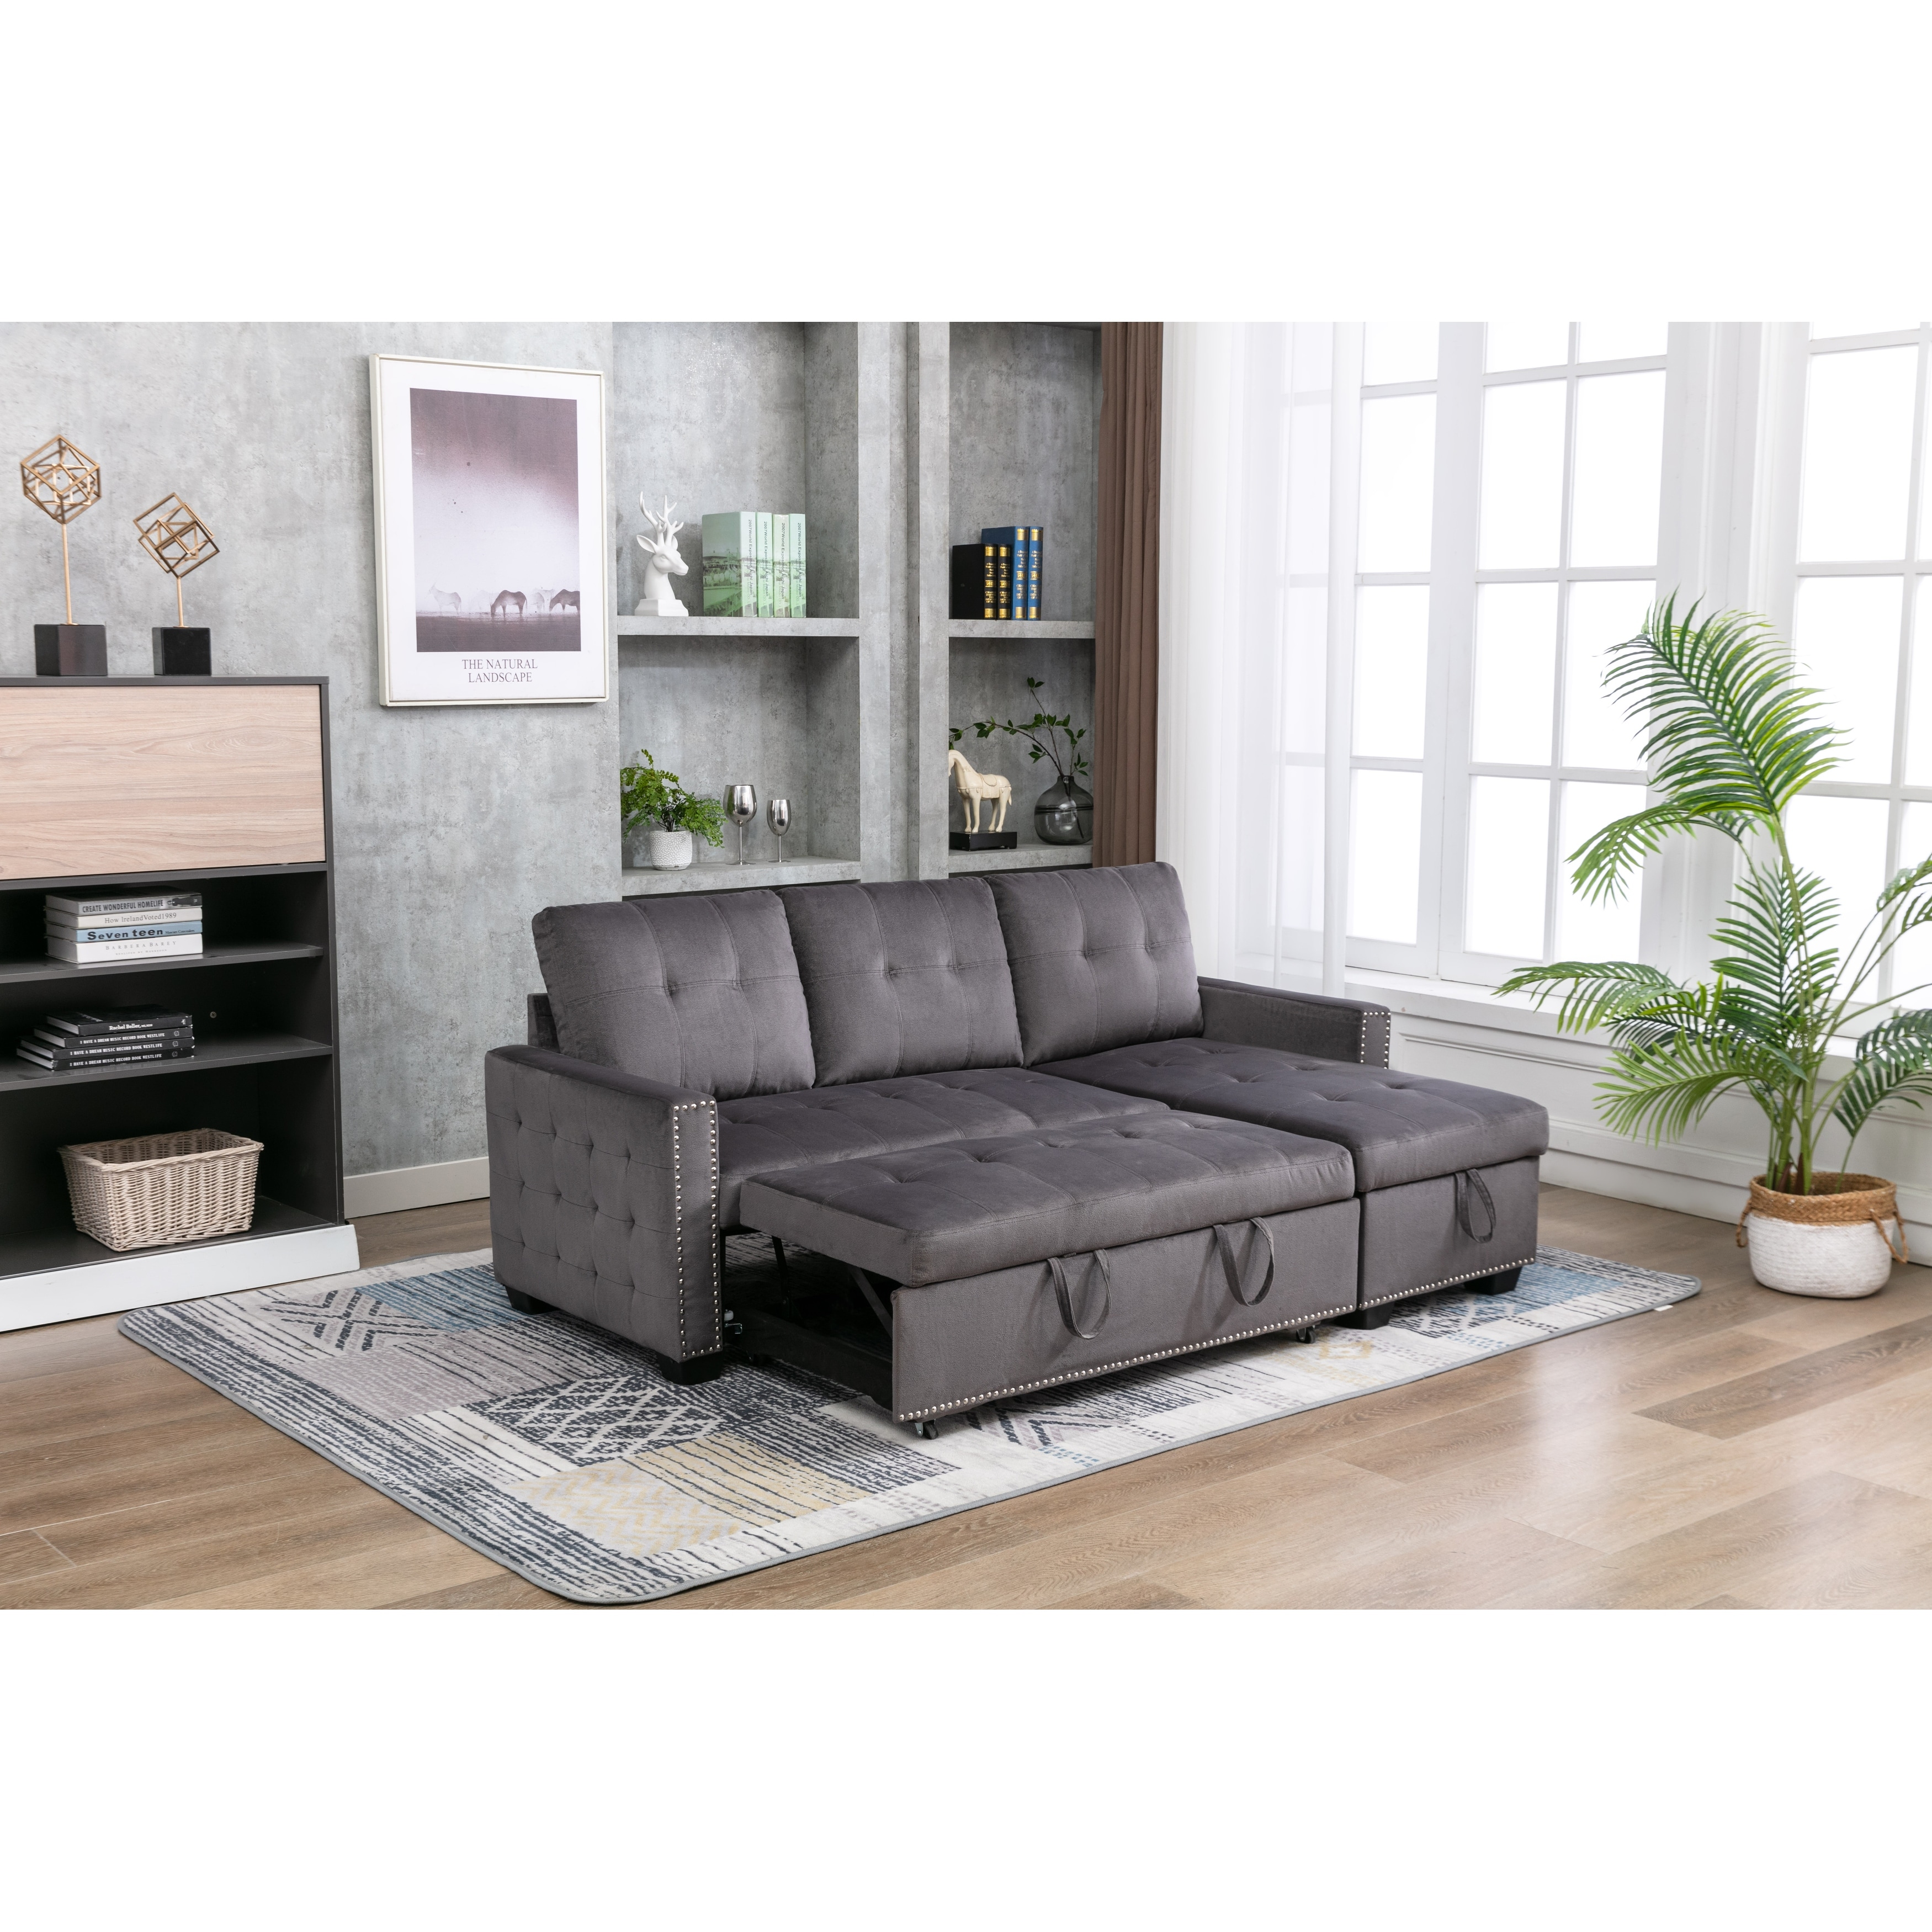 77 Inch L-shape Reversible Sleeper Sectional Storage Sofa Bed